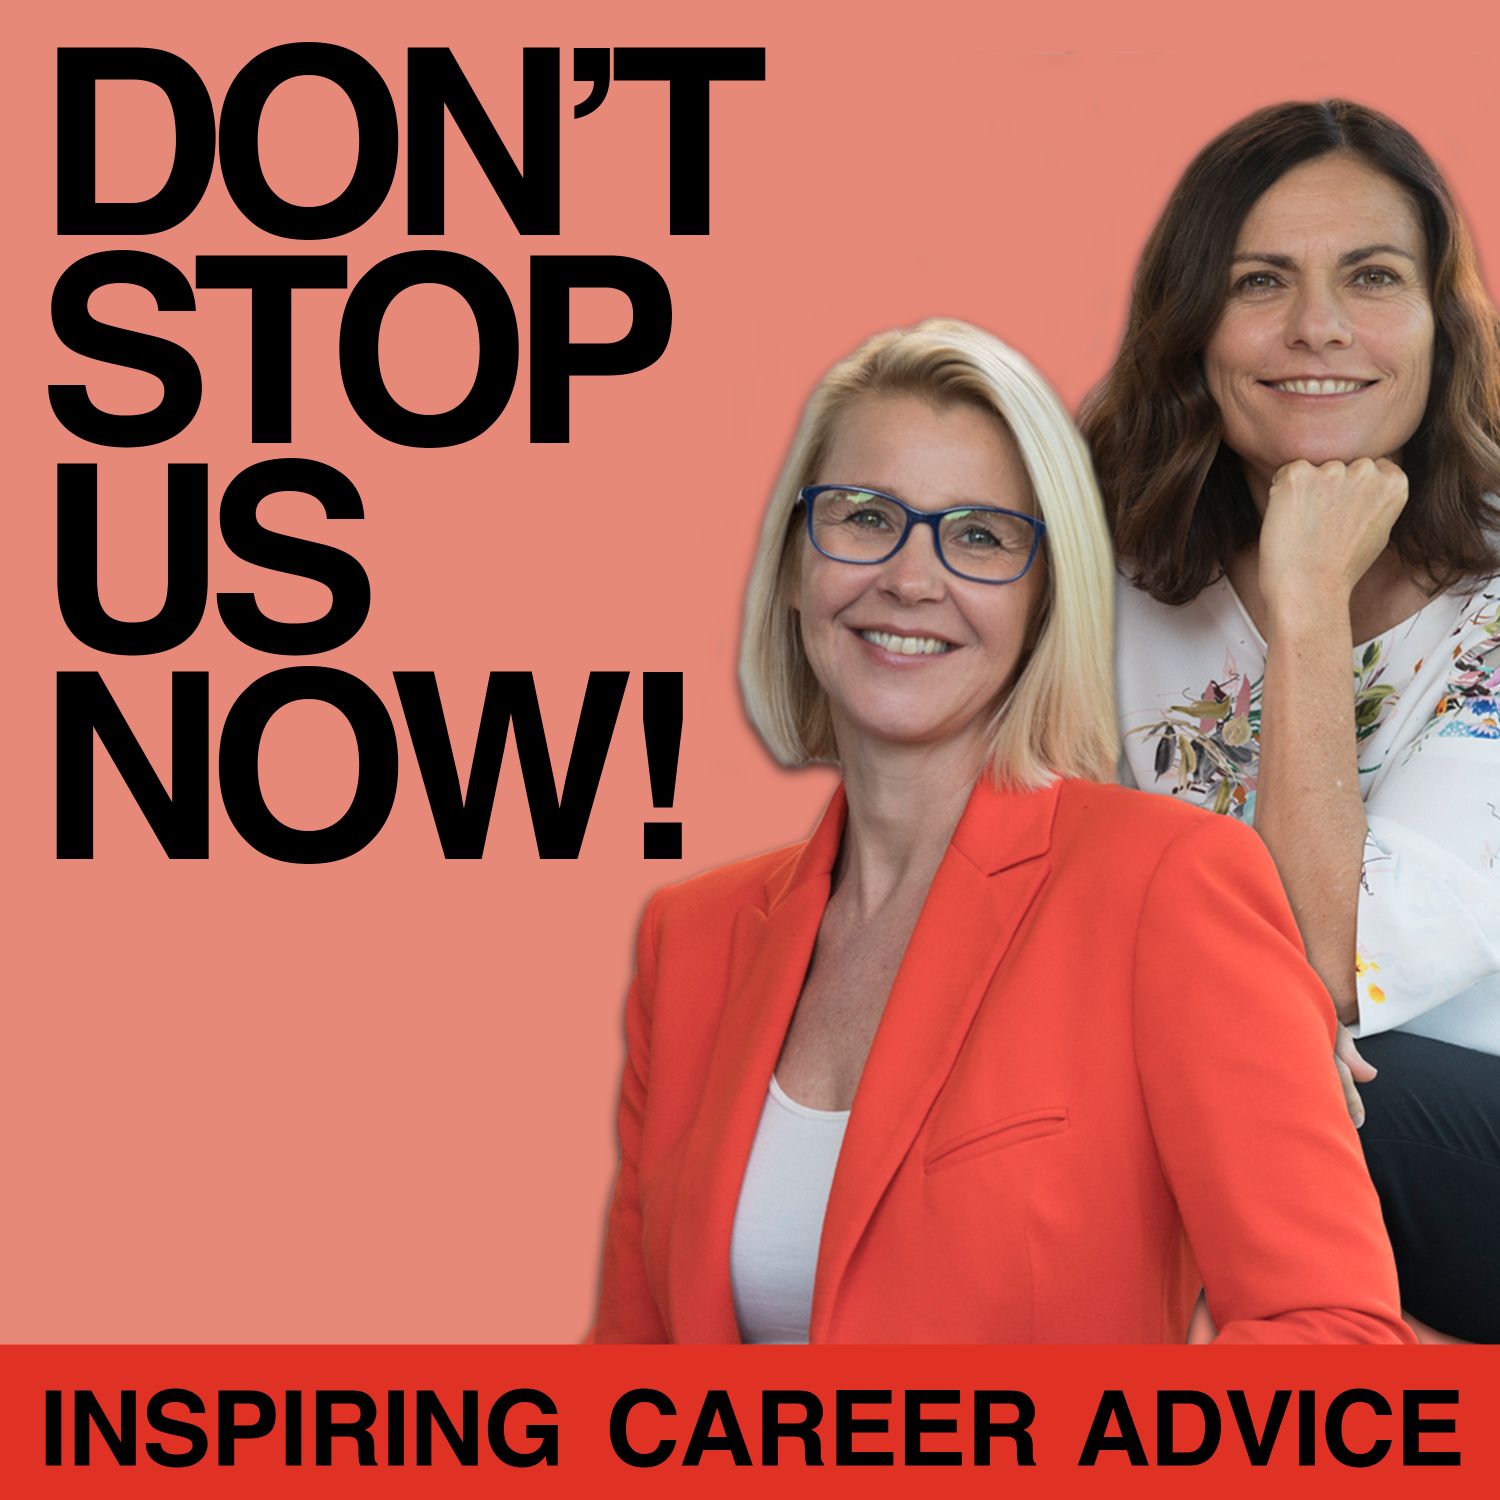 Don't Stop Us Now! Podcast